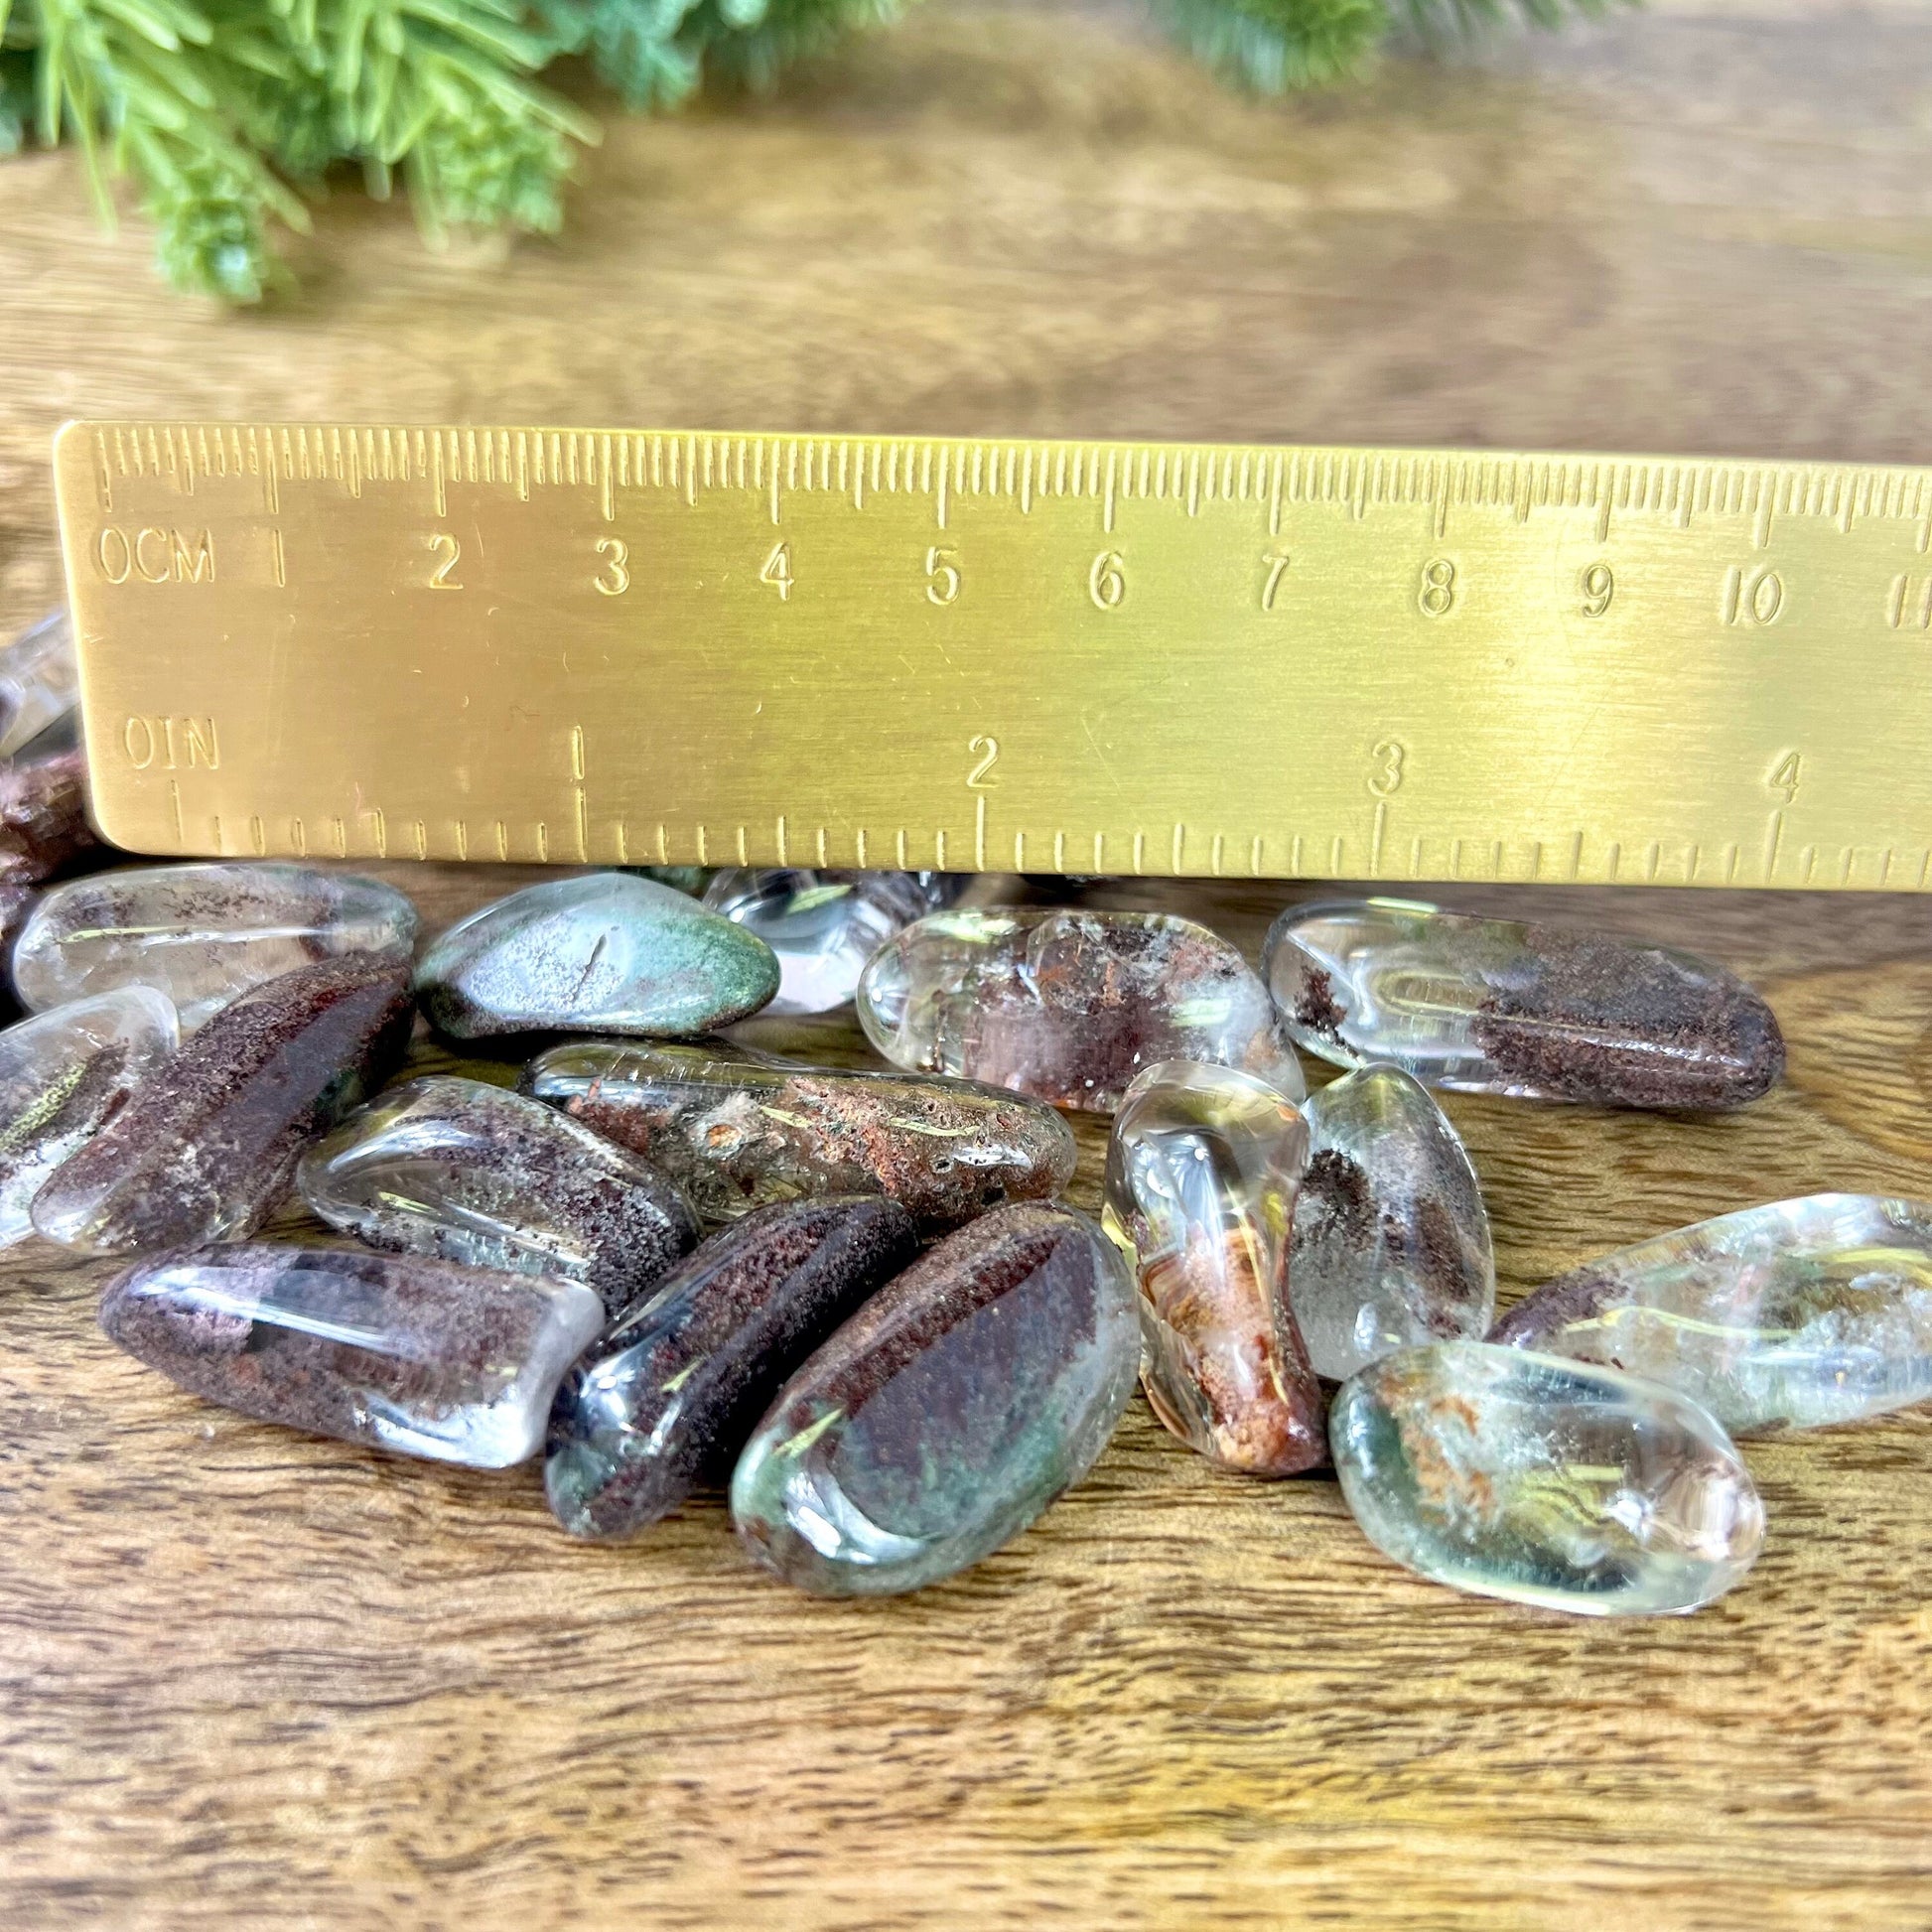 a group of lodolite Garden Quartz tumbled crystals next to a gold ruler for measure